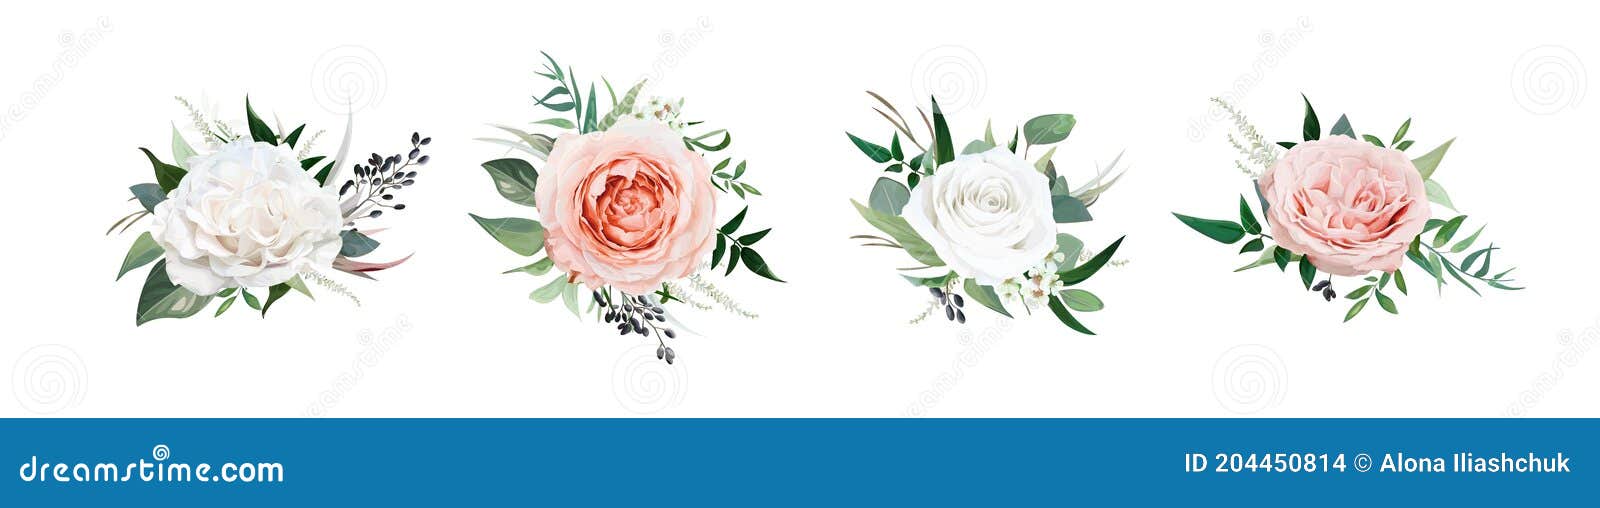 , watercolor style floral bouquet. blush peach, dusty pink, ivory white rose flowers, eucalyptus greenery, berries, tender